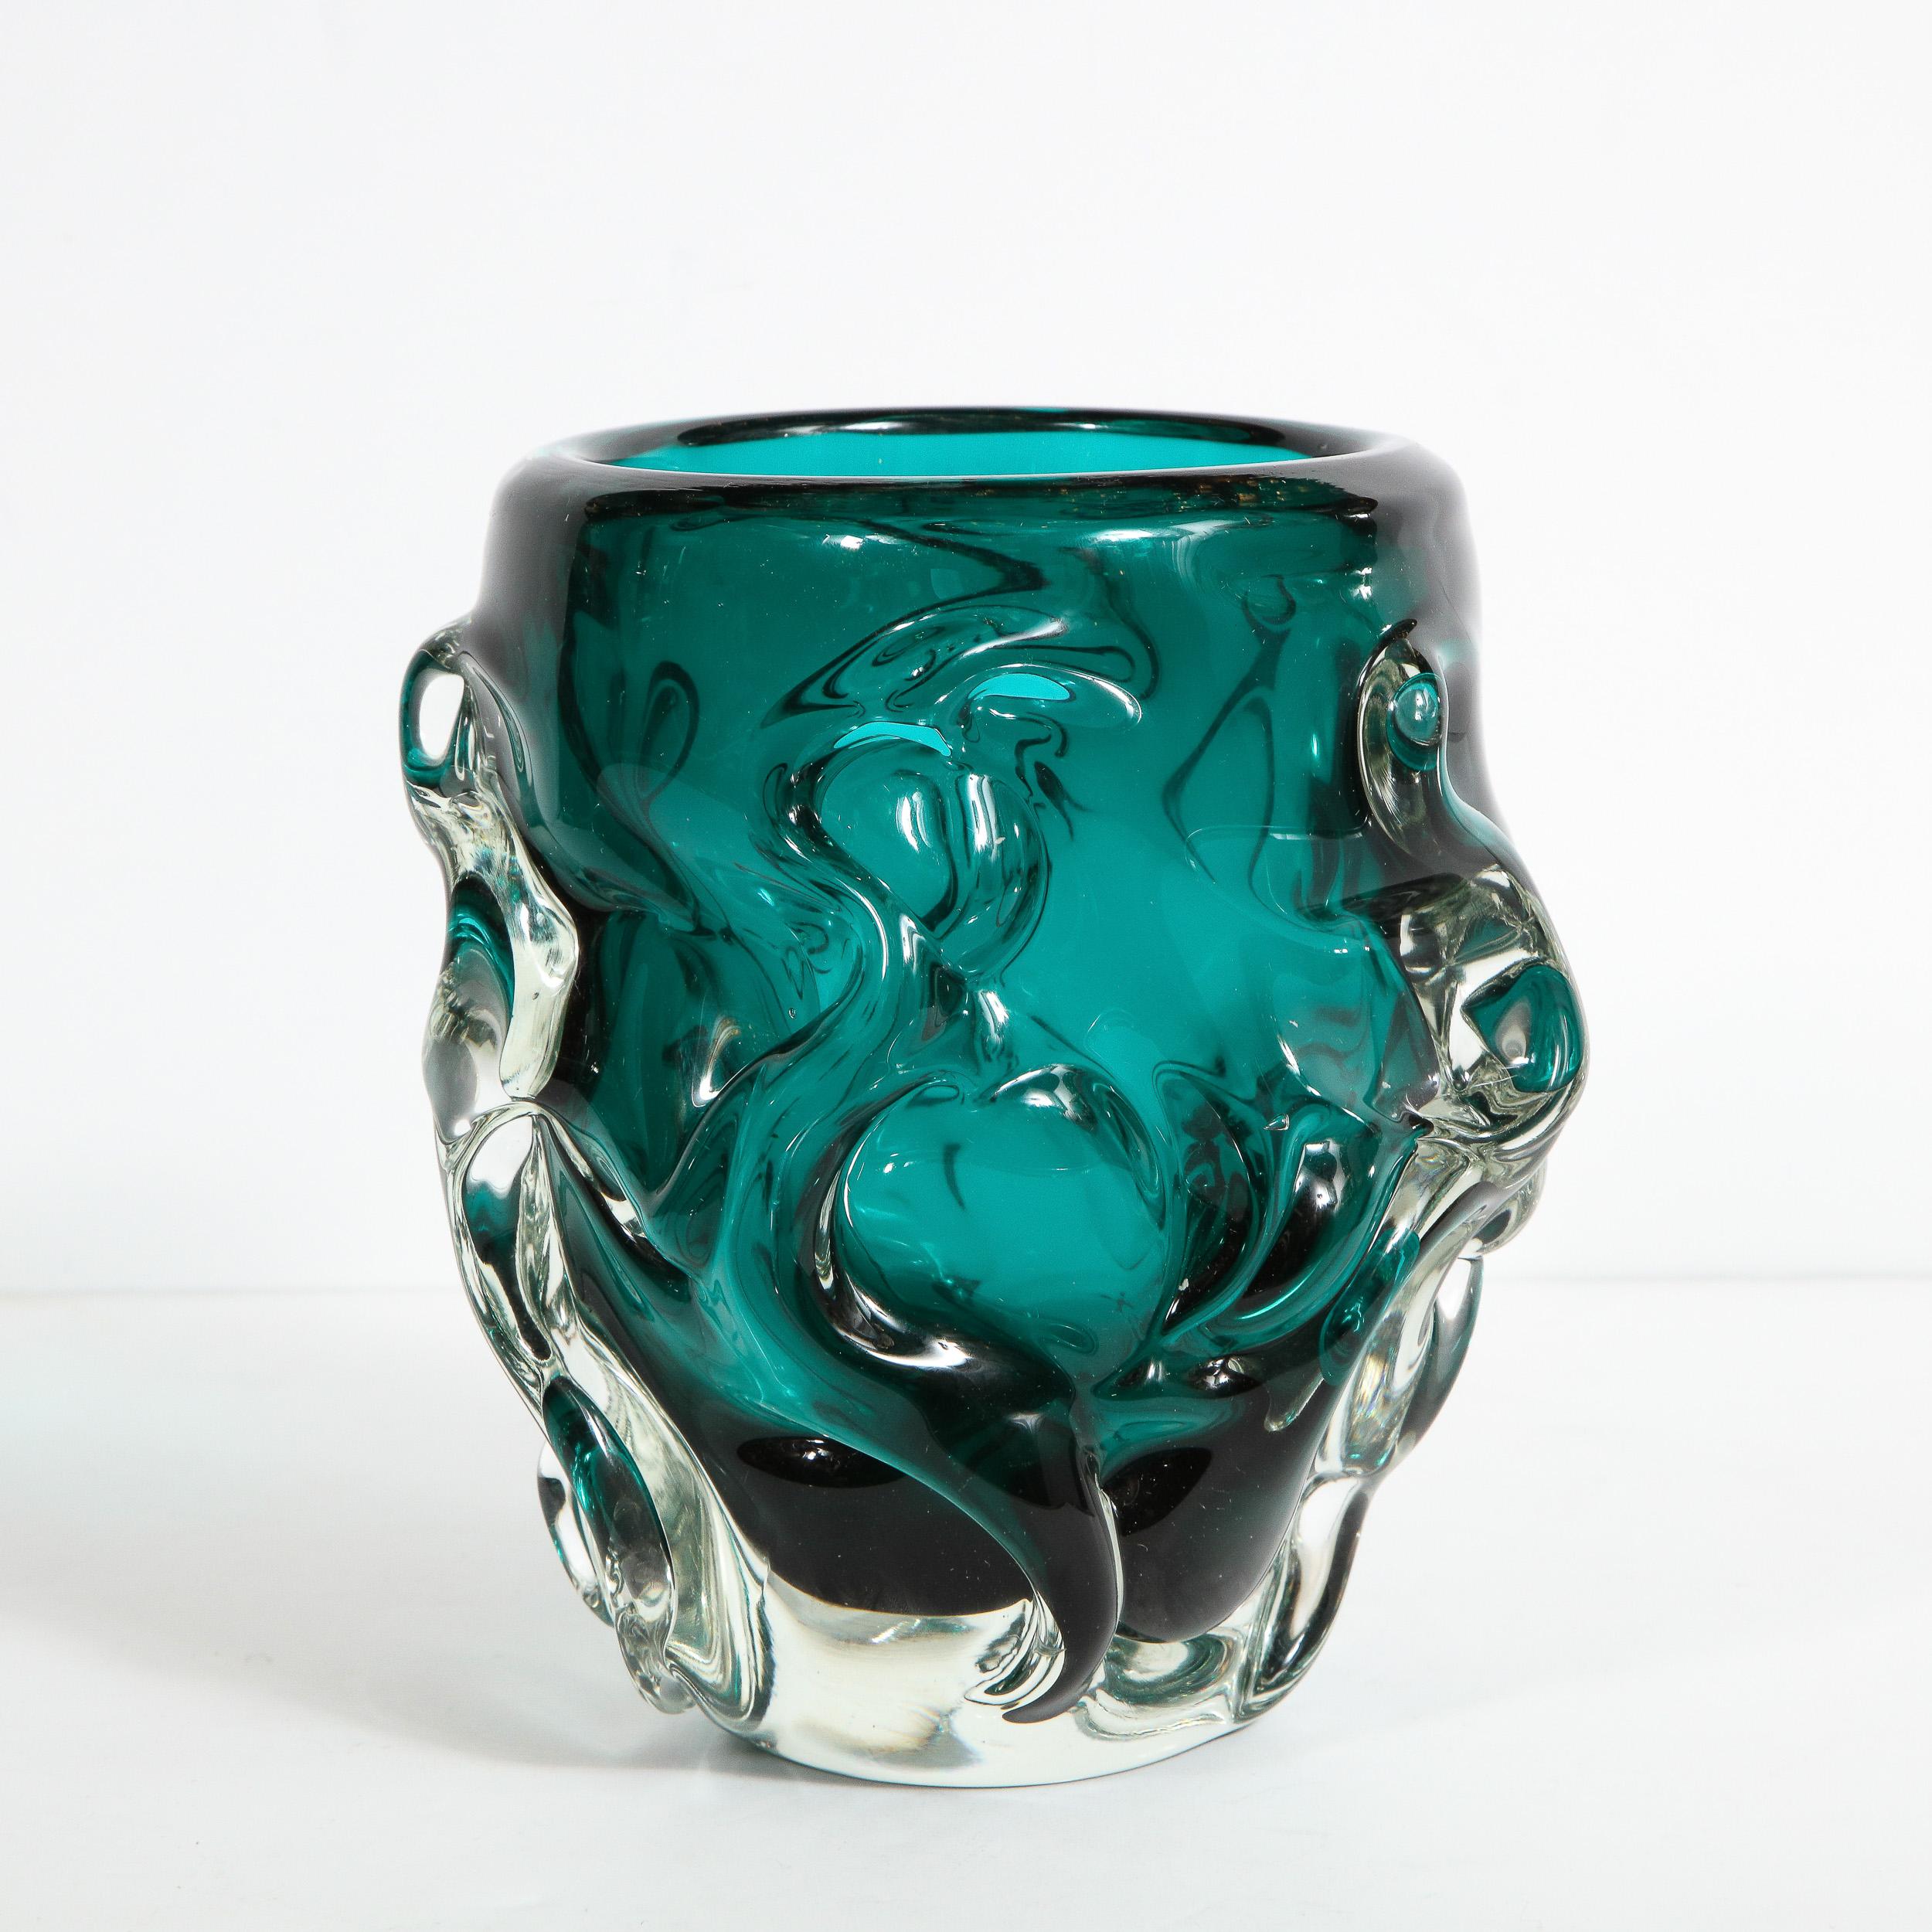 Murano Glass Mid-Century Modern Sculptural Hand Blown Murano Teal and Translucent Glass Vase